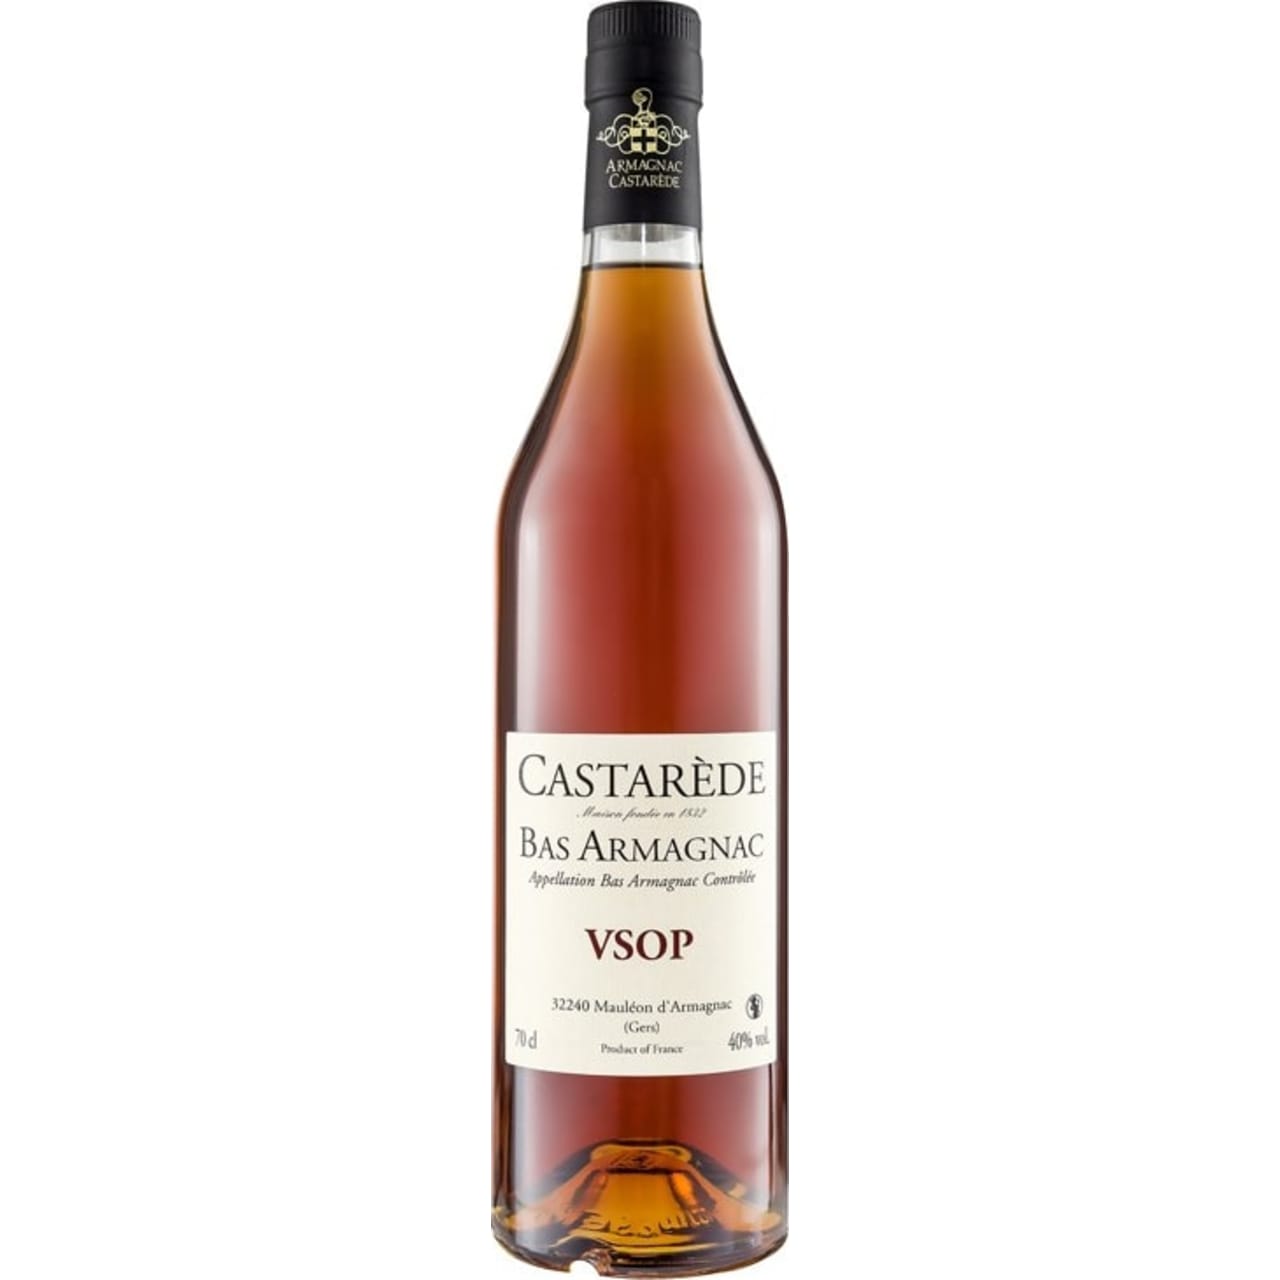 The VSOP is aged for eight years, twice the legal minimum, and is fruity and lightly spicy with notes of coconut, walnut and honey.